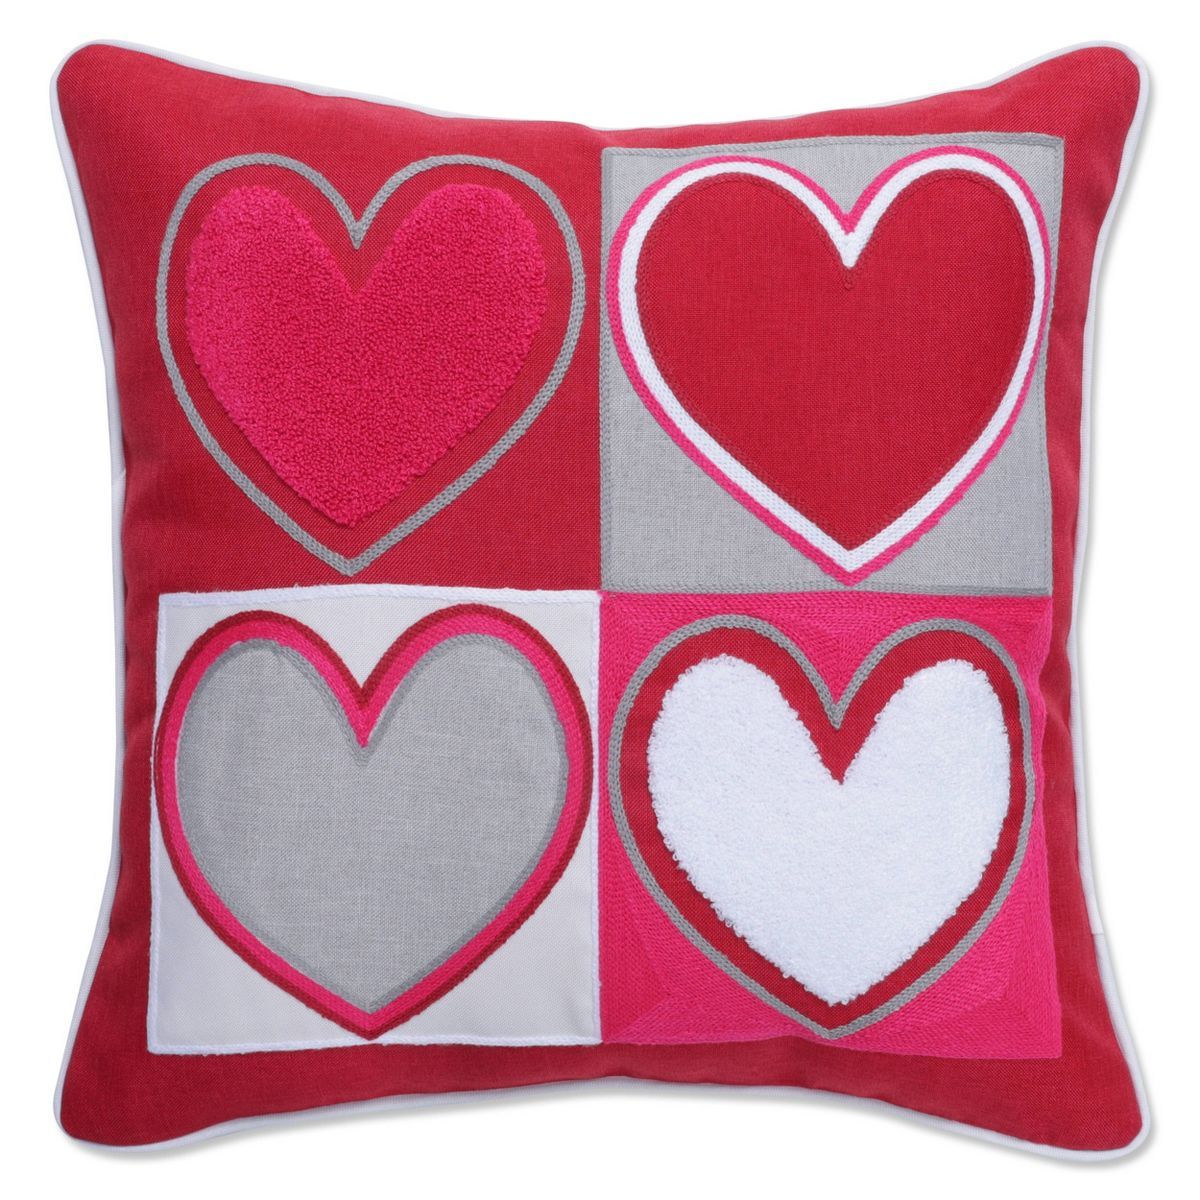 17"x17" Indoor Heartfelt Hearts Valentines Square Throw Pillow Red - Pillow Perfect | Target